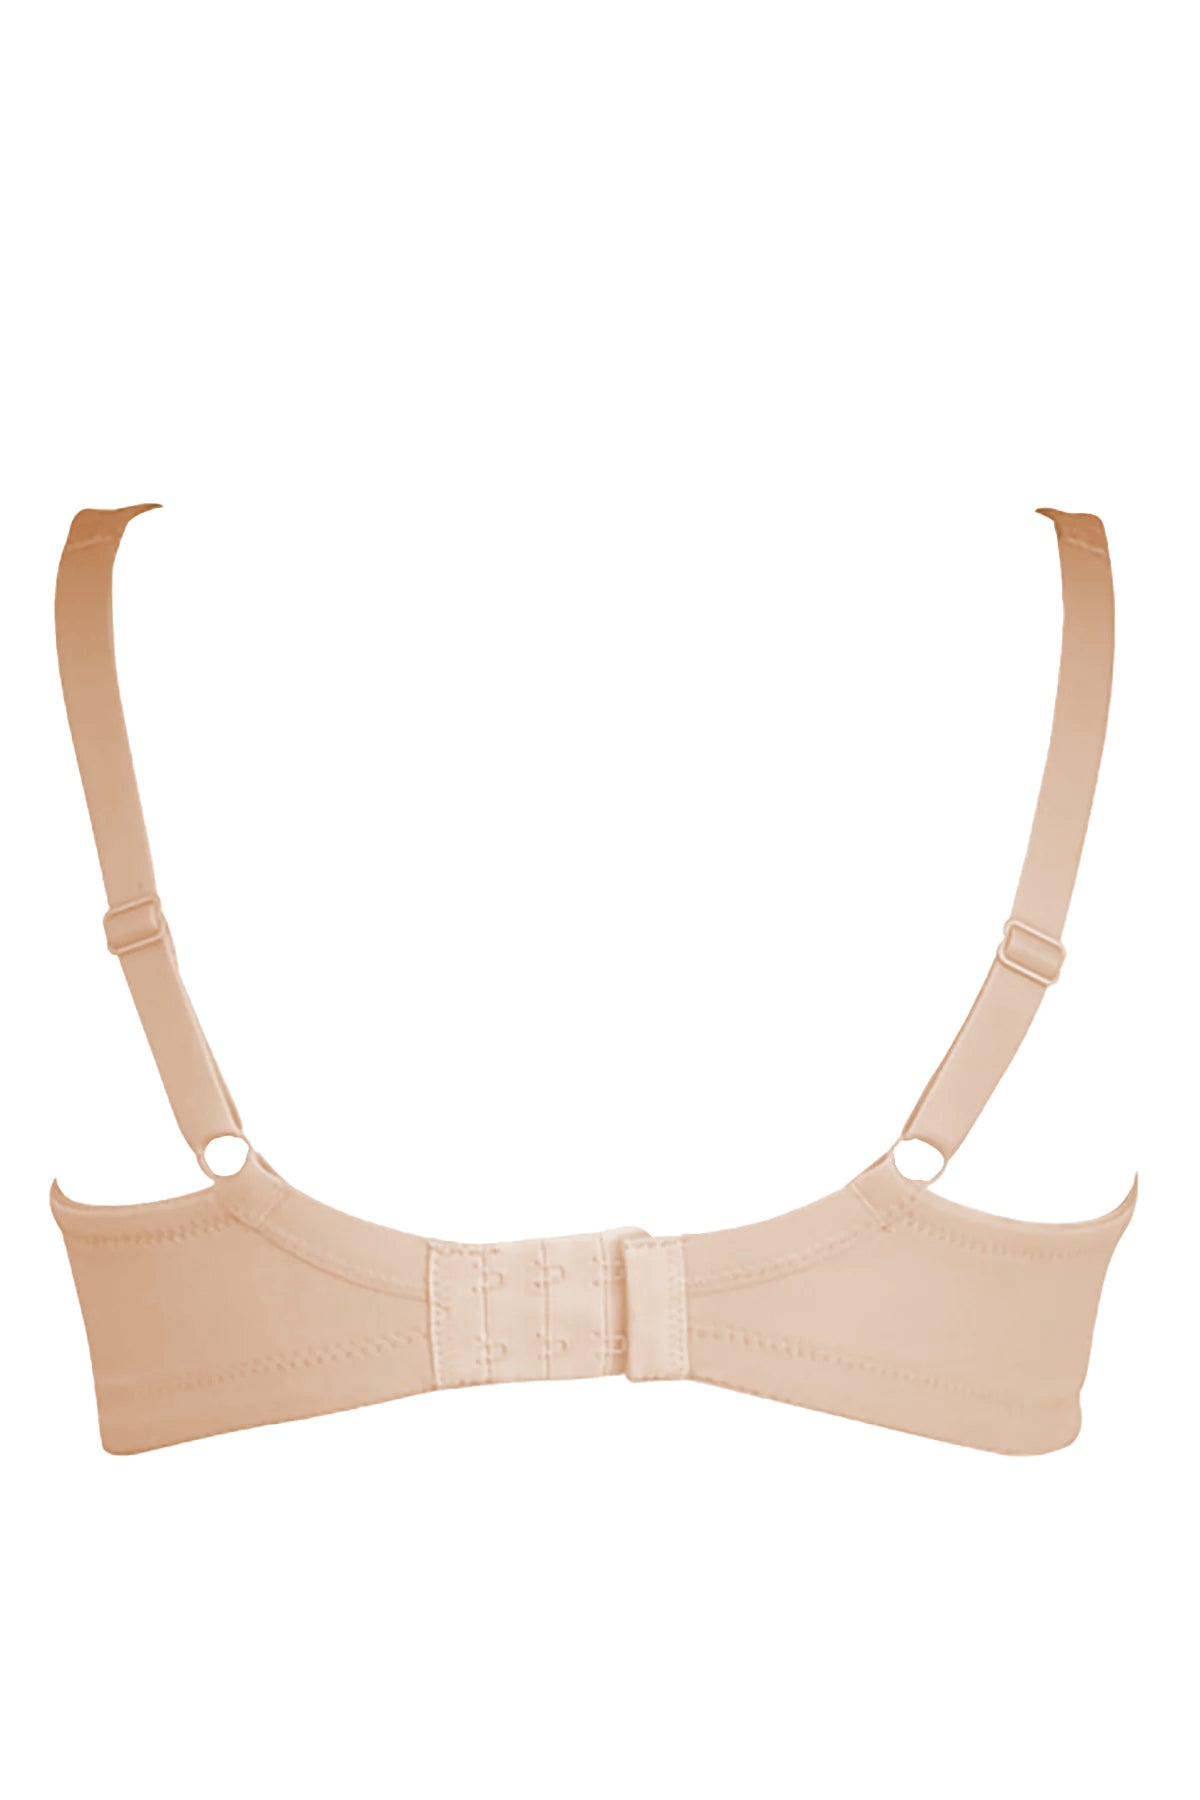 BLS - Cece Non Wired And Non Padded Cotton Bra - Skin